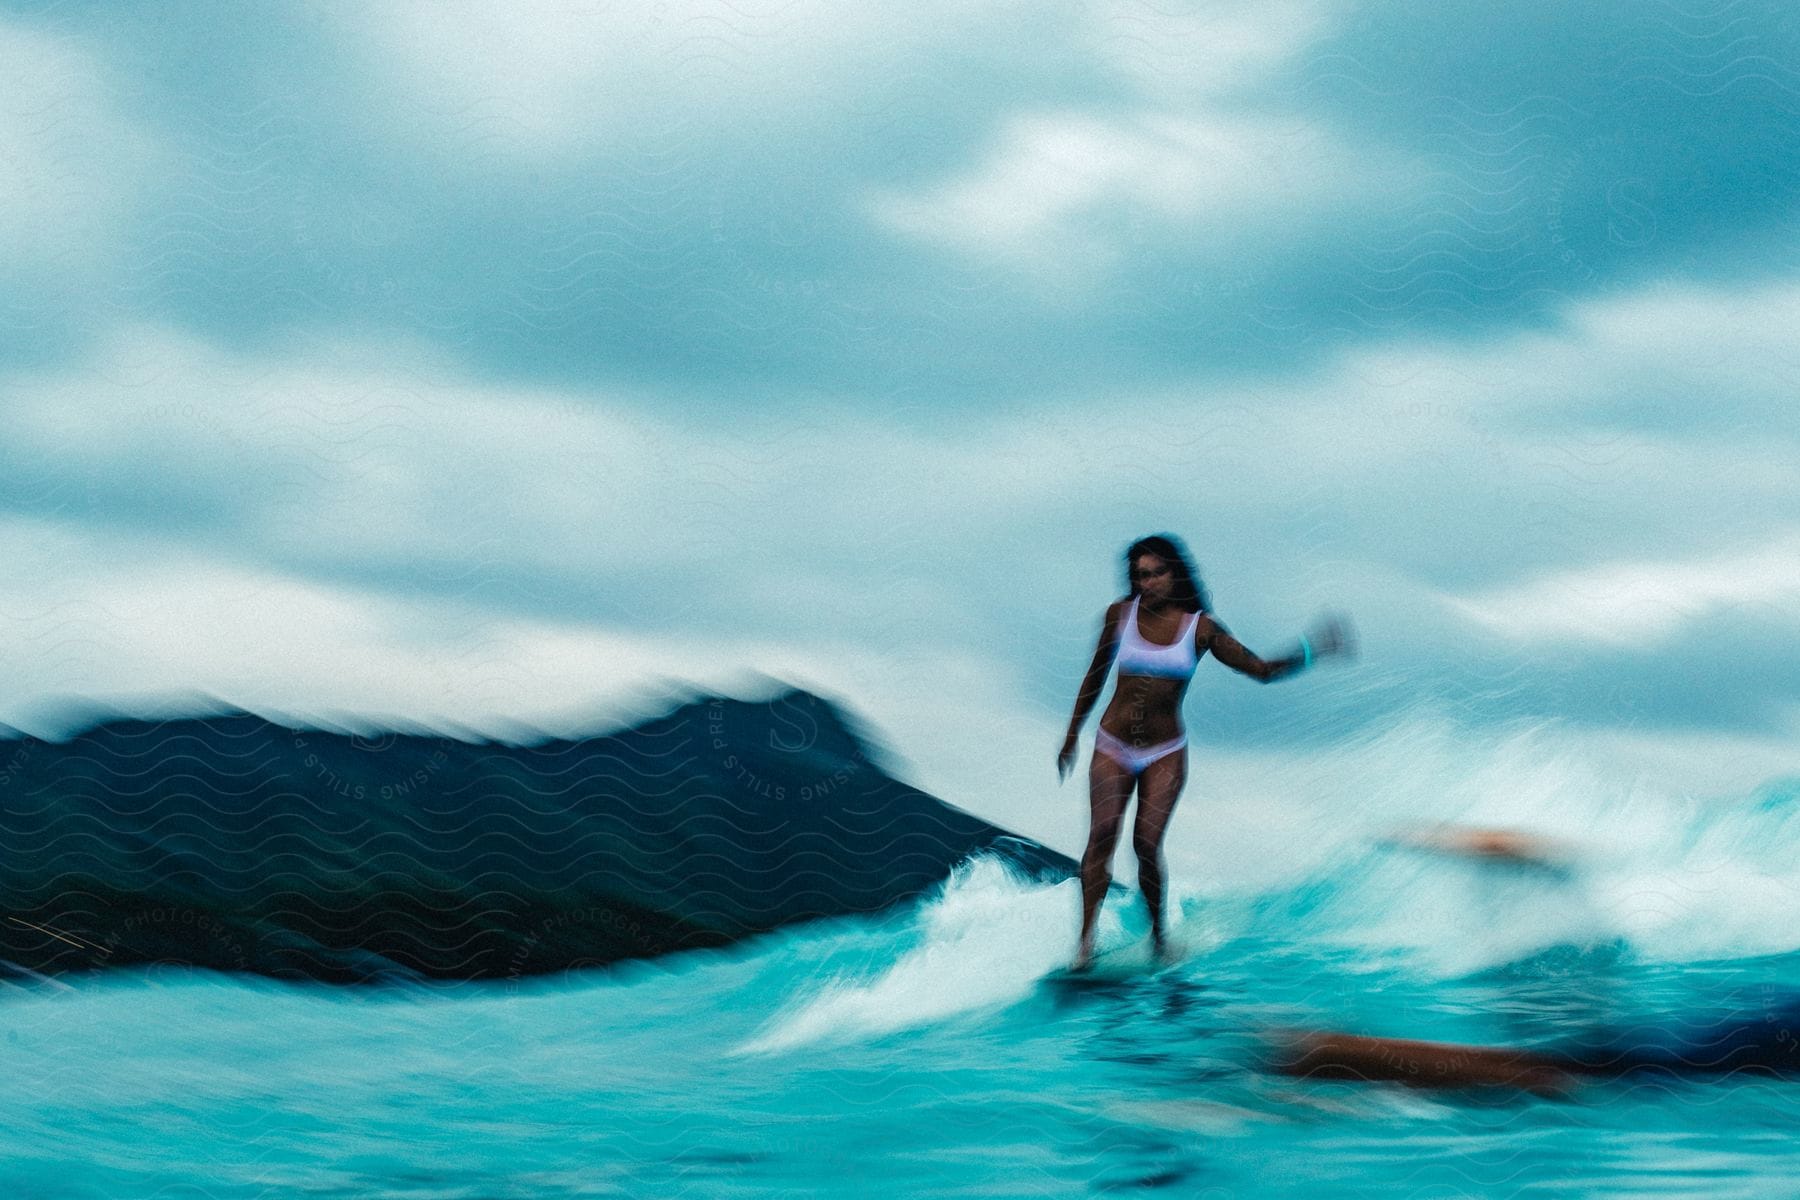 A woman surfing in ocean water during midday